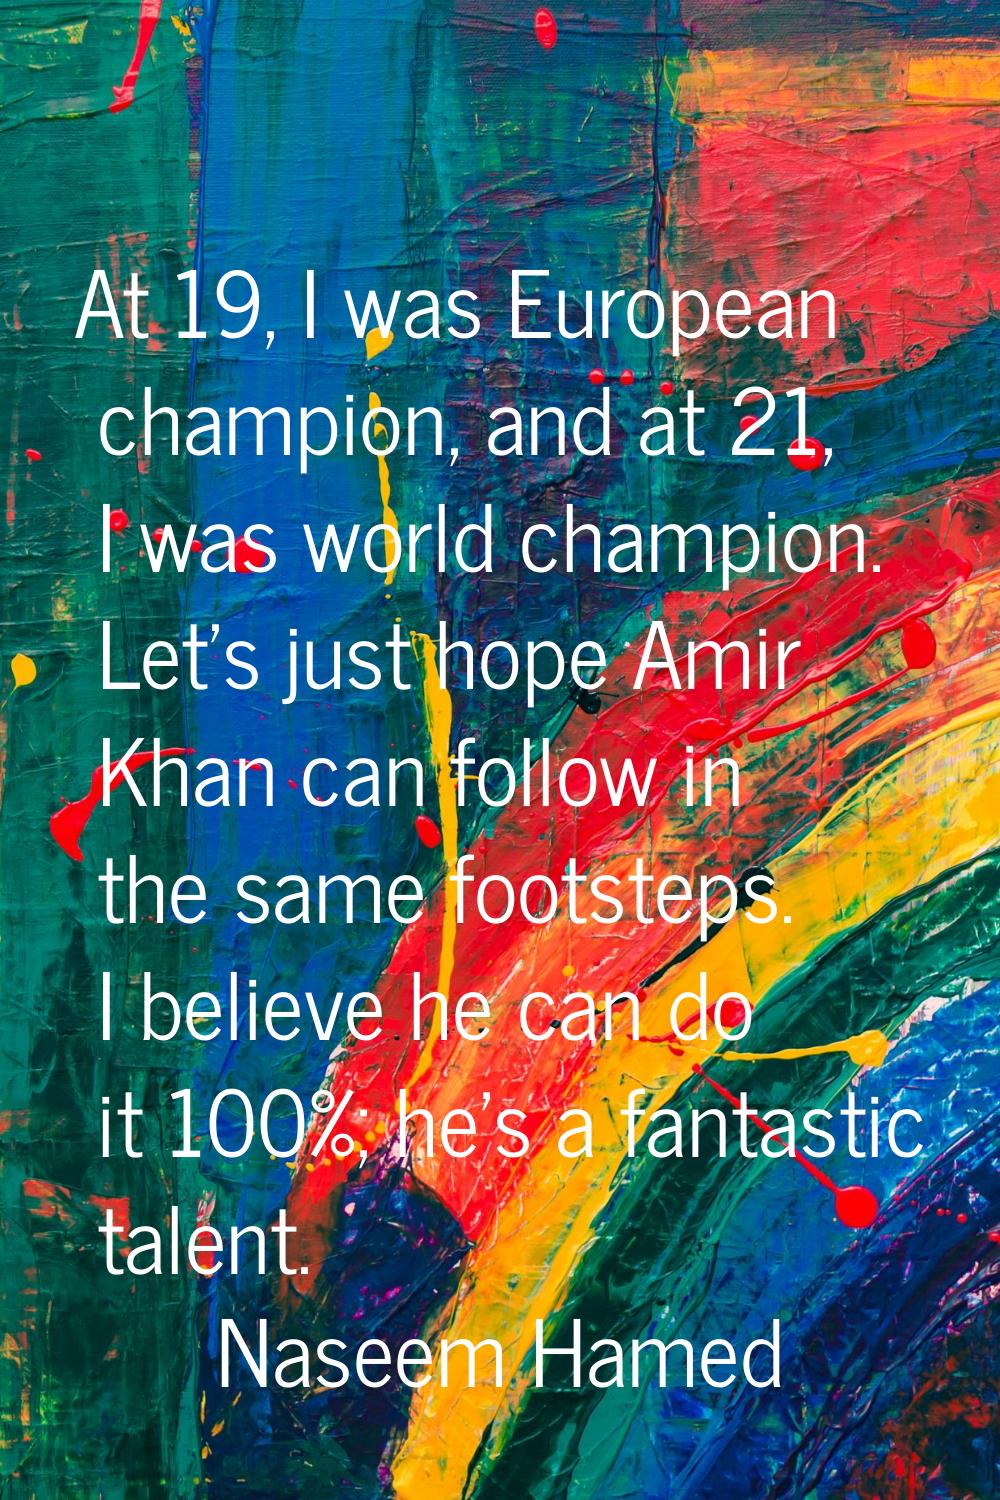 At 19, I was European champion, and at 21, I was world champion. Let's just hope Amir Khan can foll